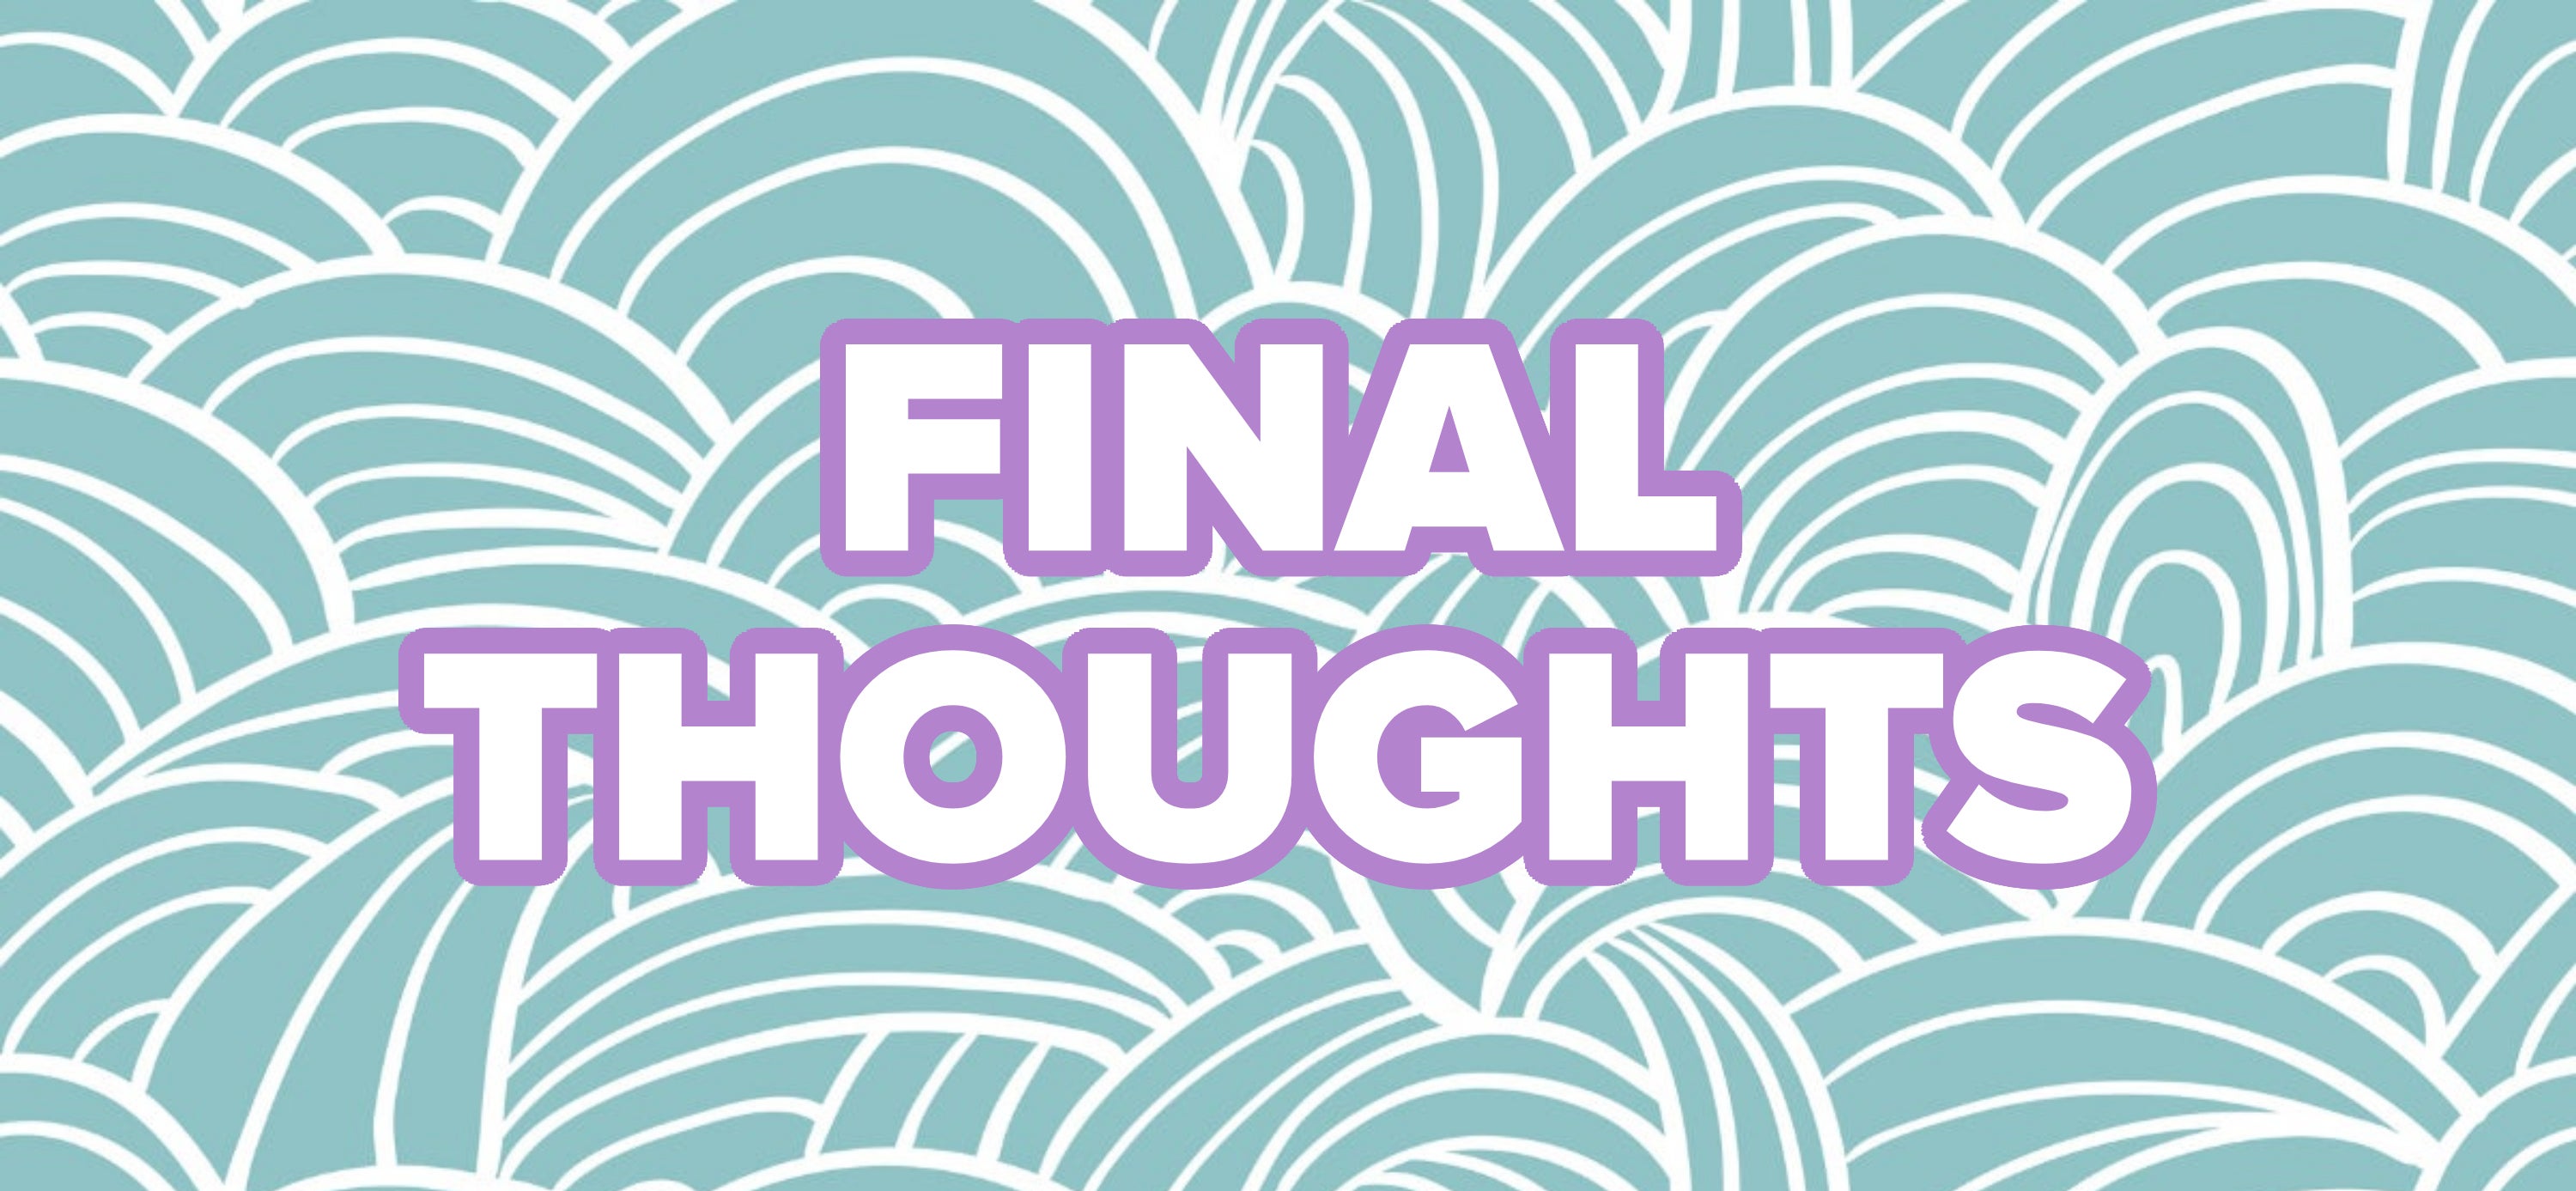 Text: &quot;FINAL THOUGHTS&quot; over a decorative background